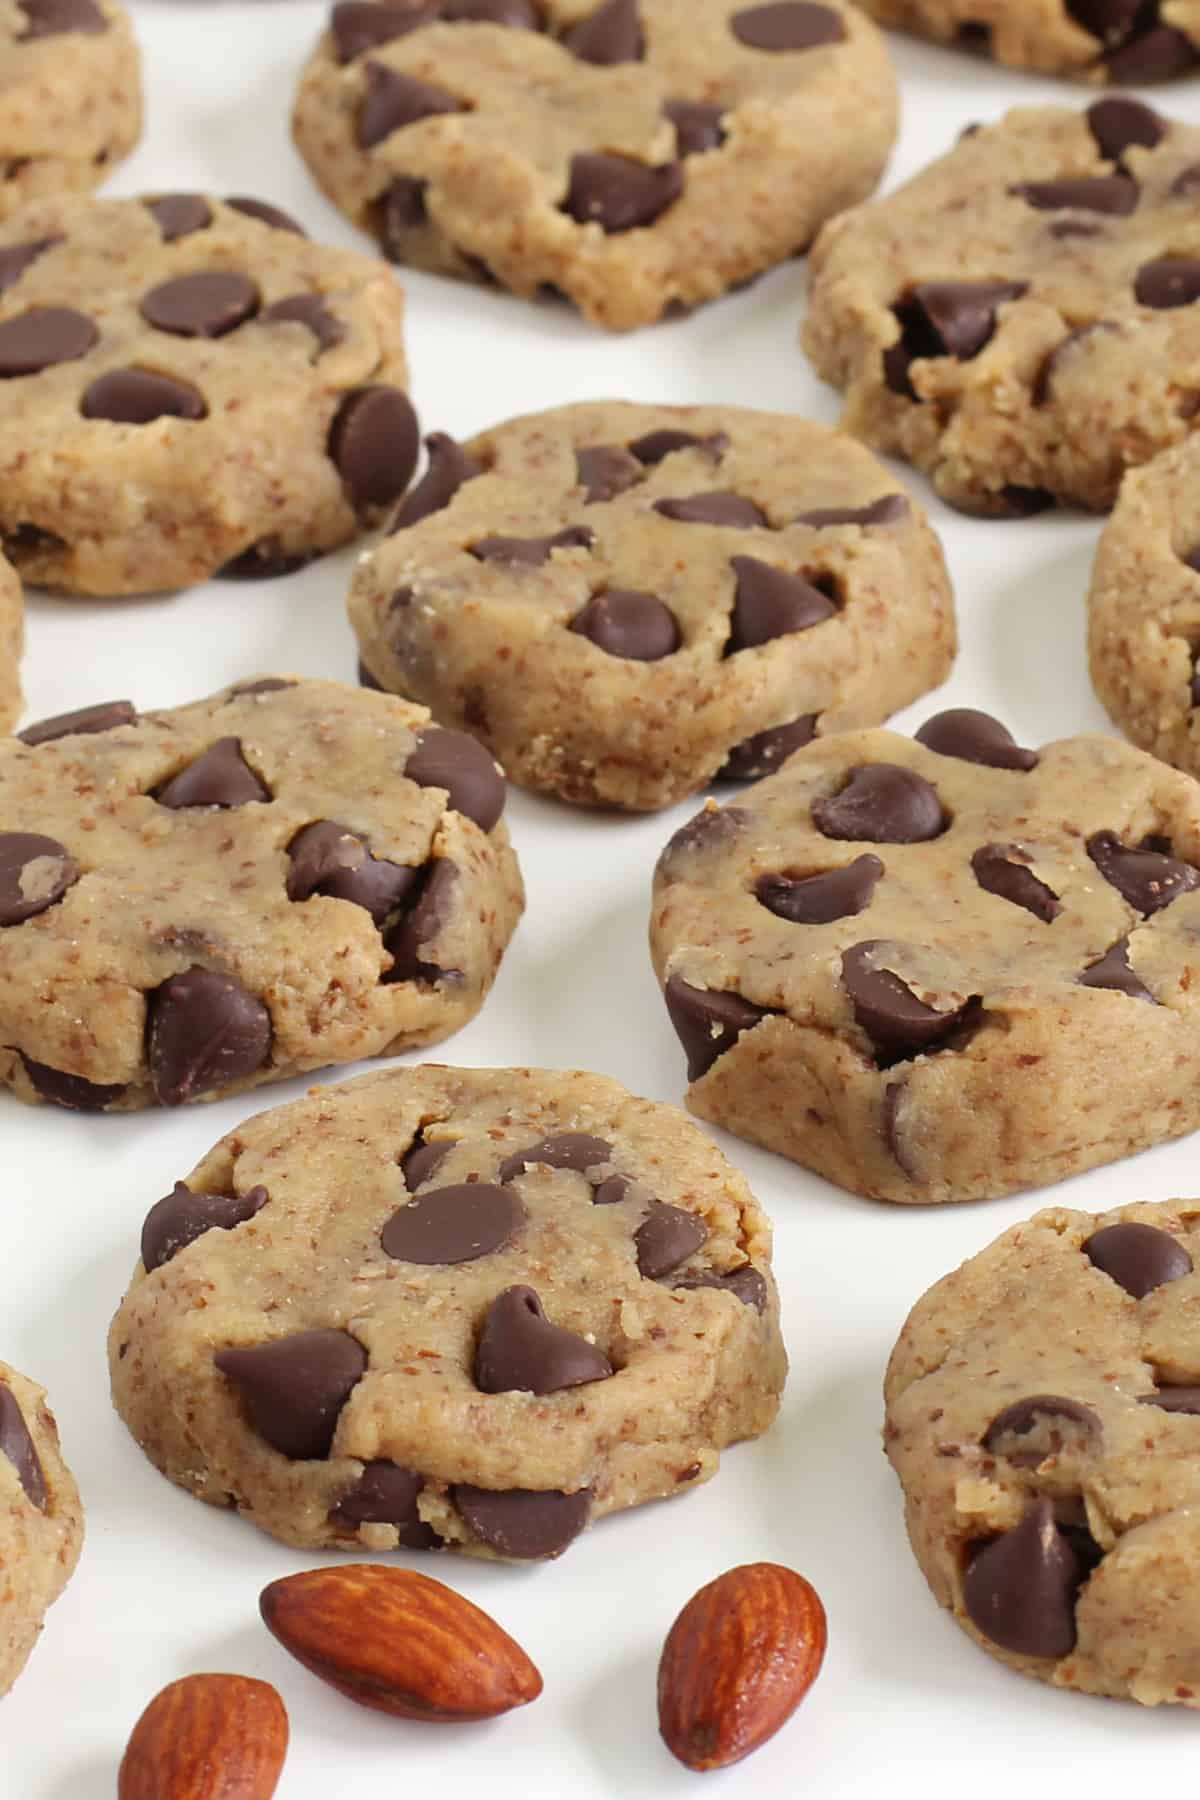 no-bake chocolate chip cookies made with almond flour